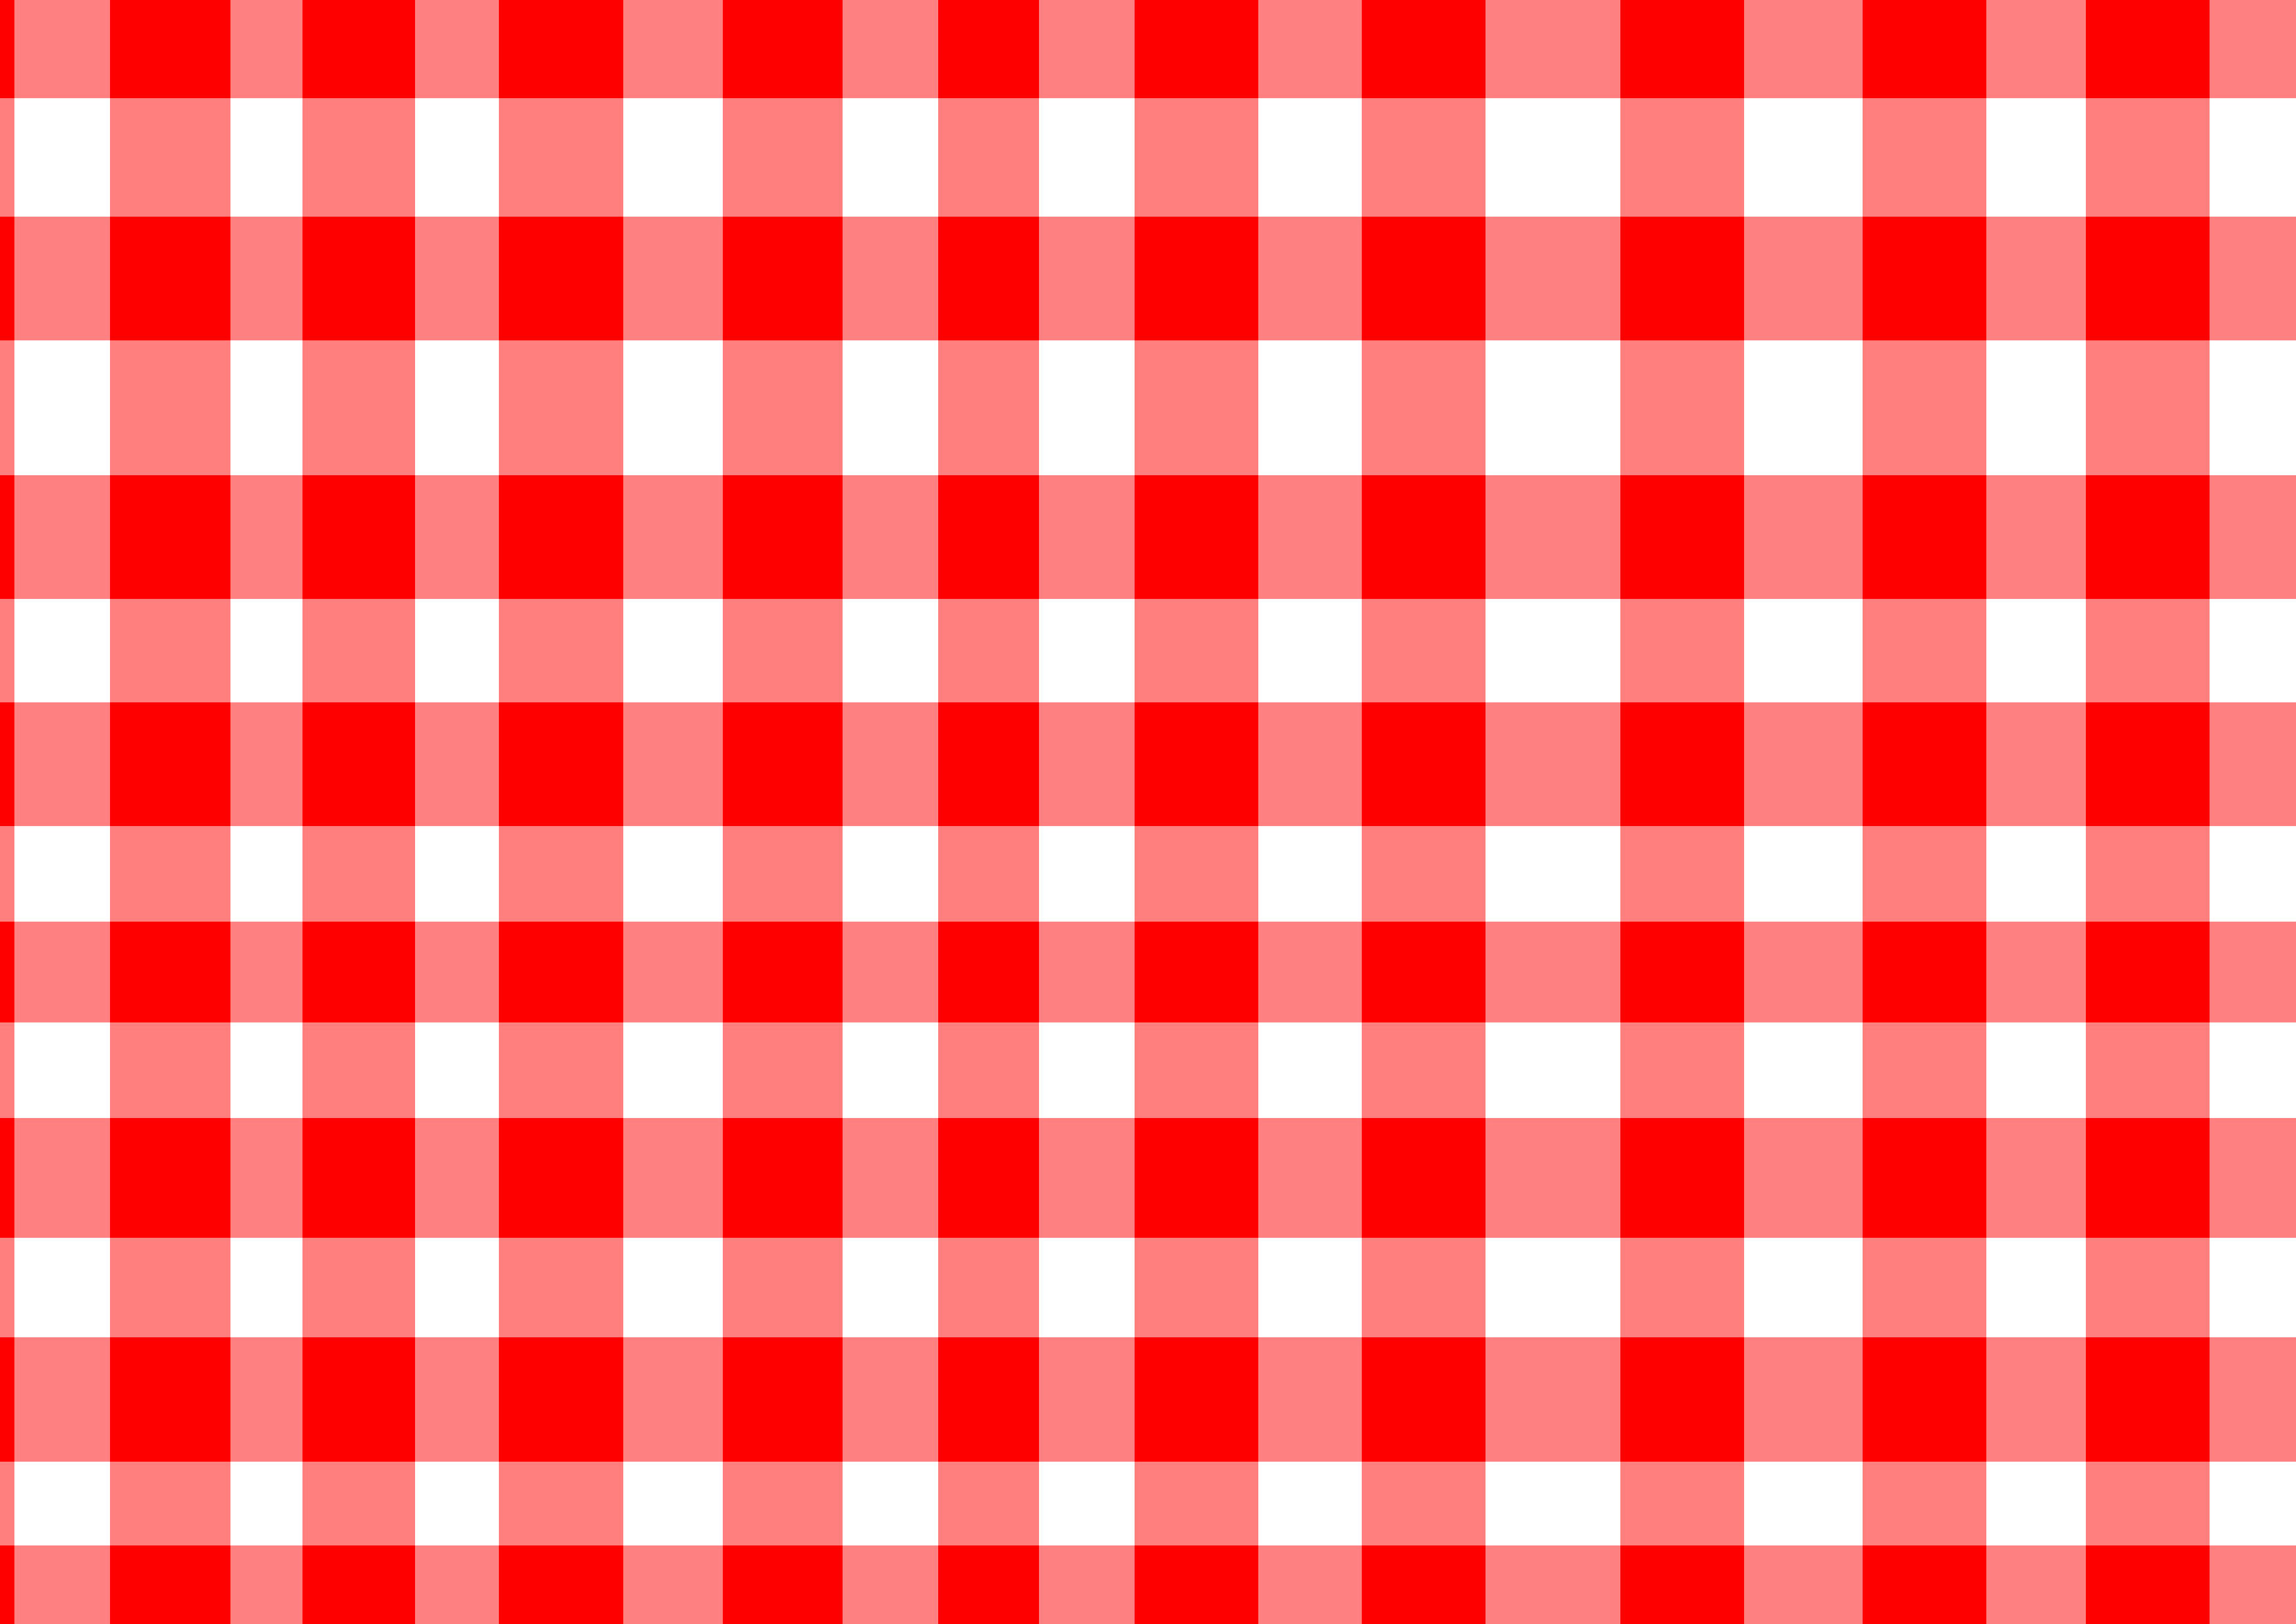 red and white gingham check a4jpg 3507x2481